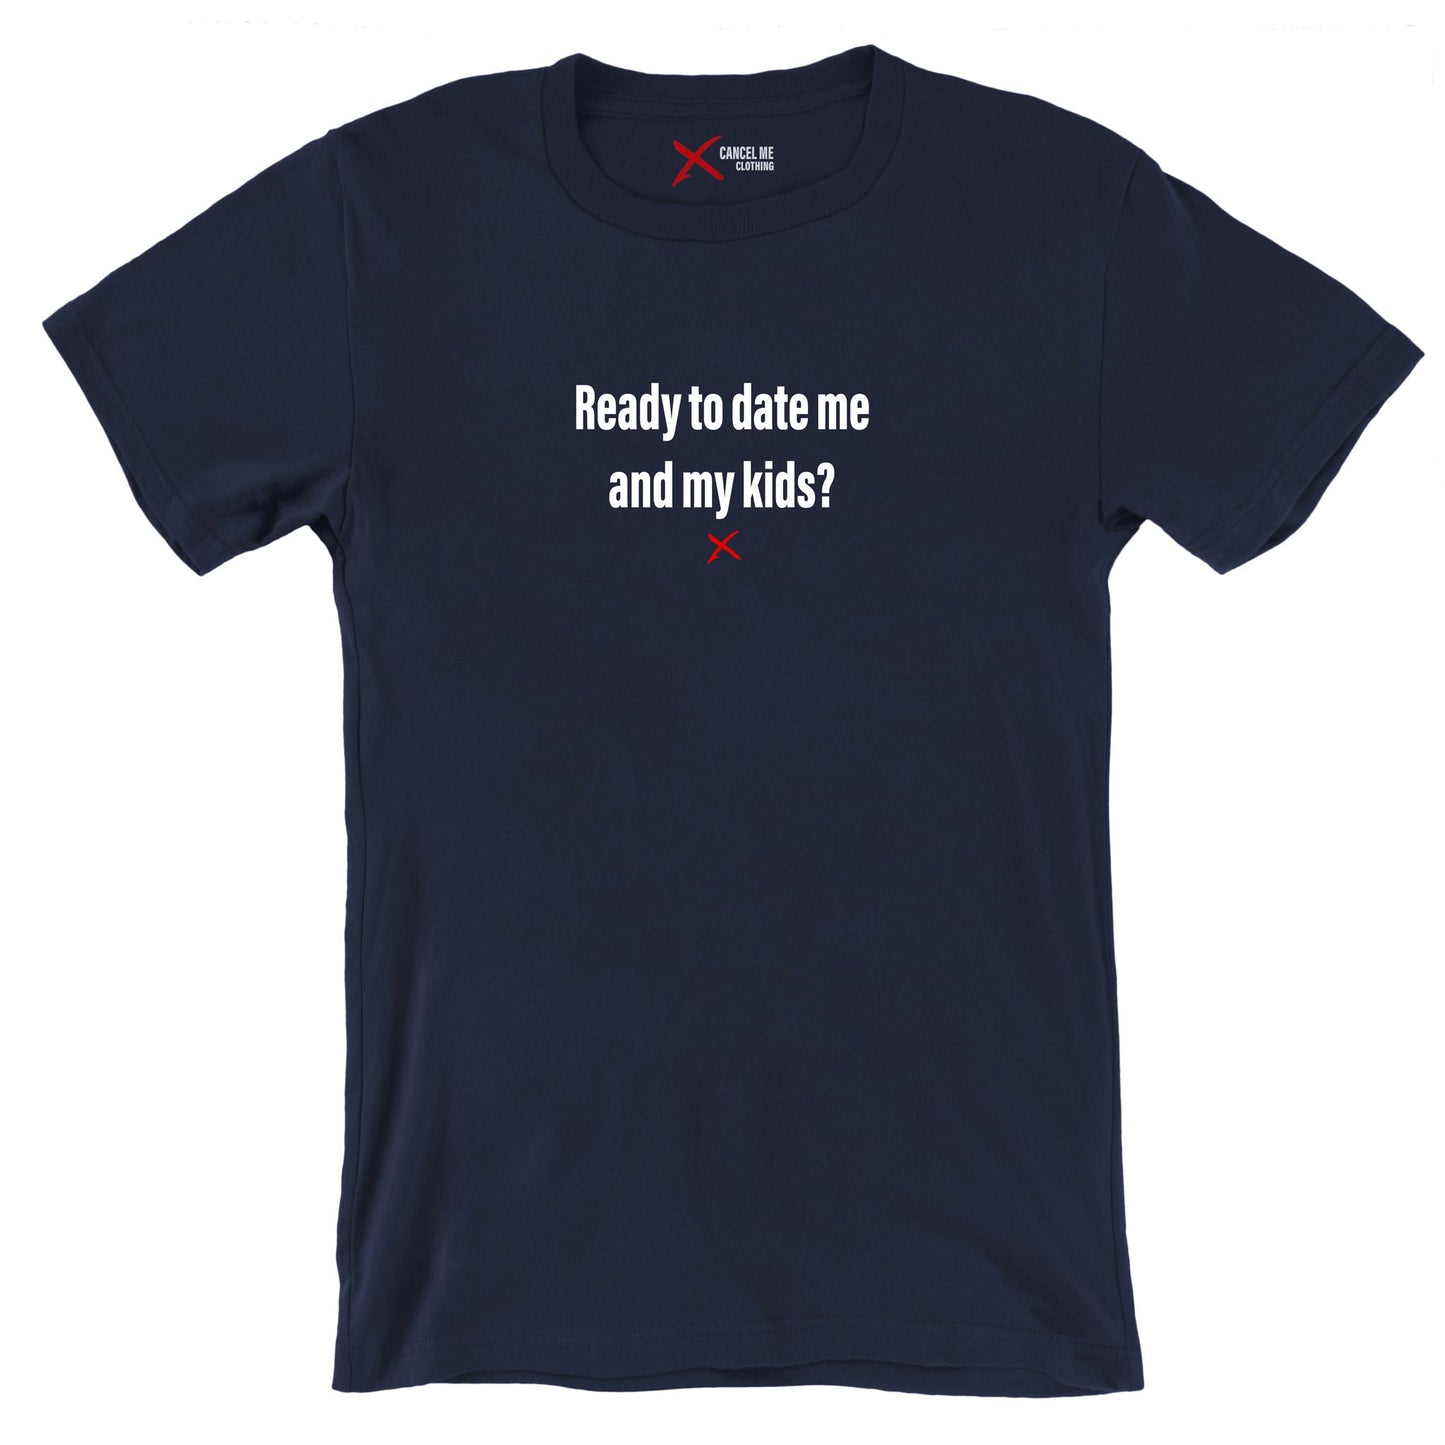 Ready to date me and my kids? - Shirt